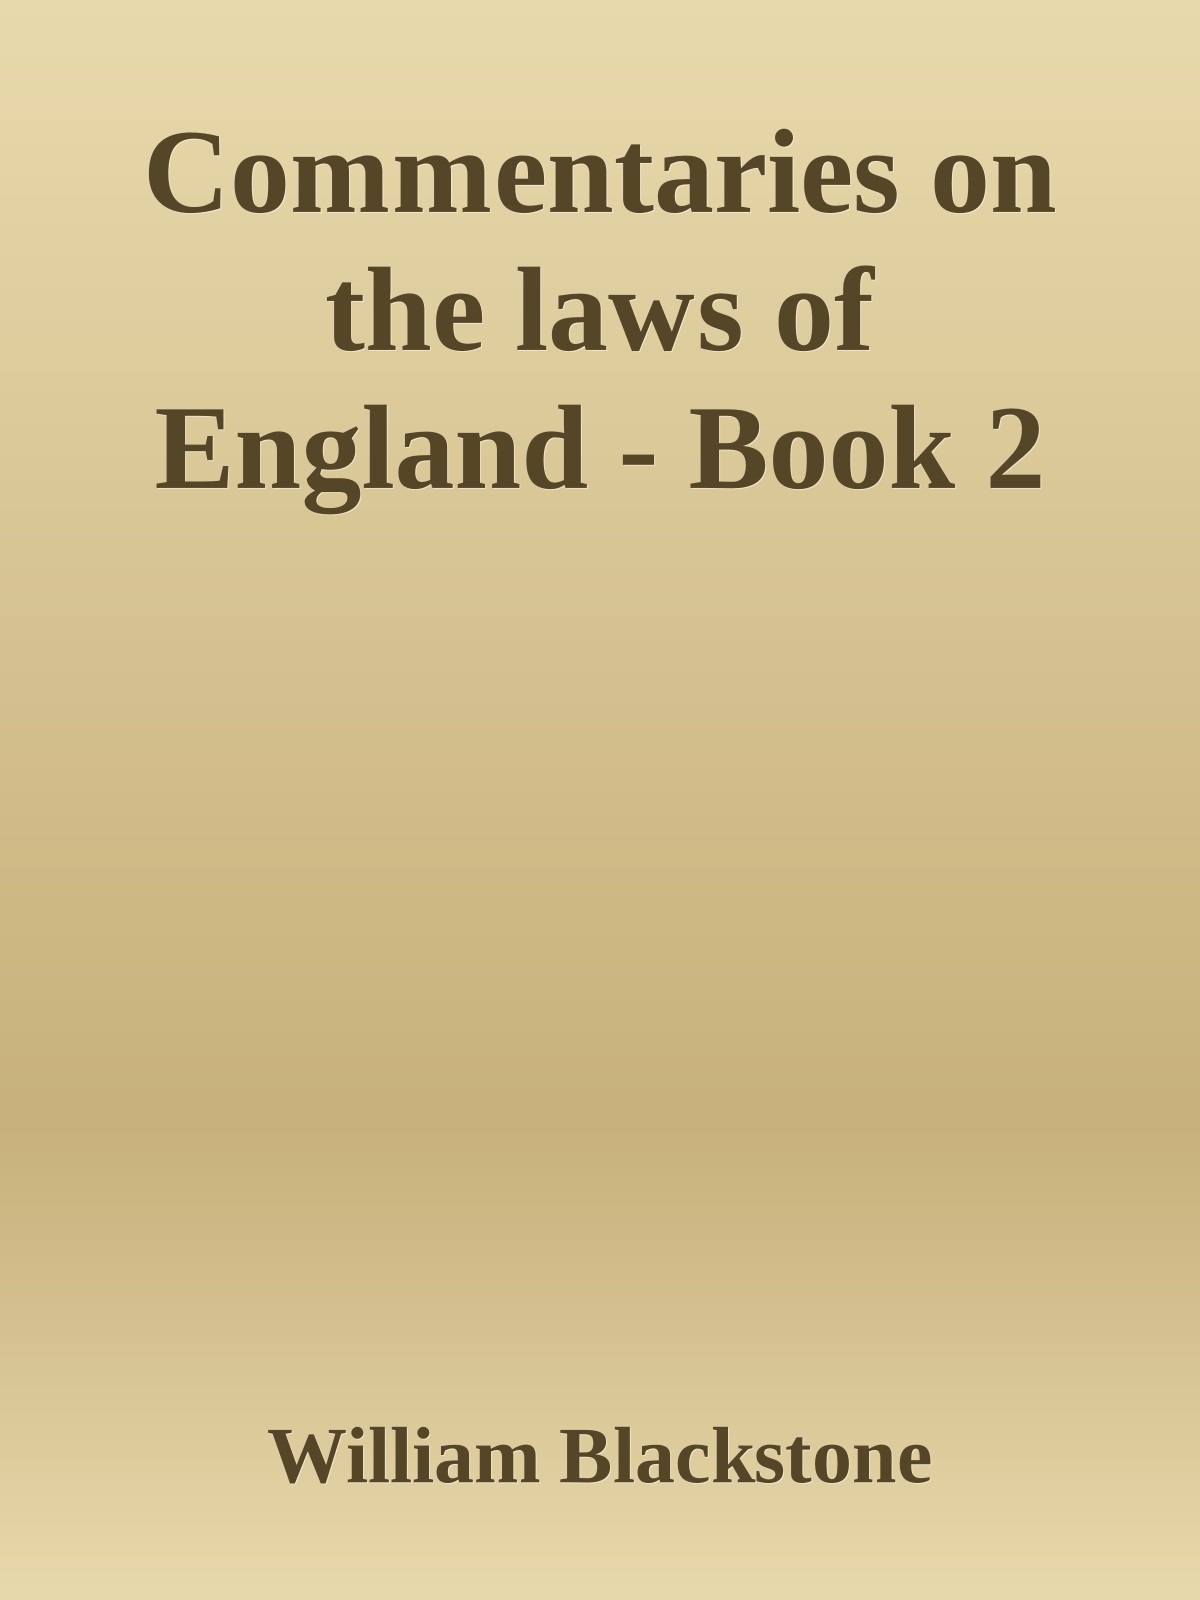 Commentaries on the laws of England - Book 2